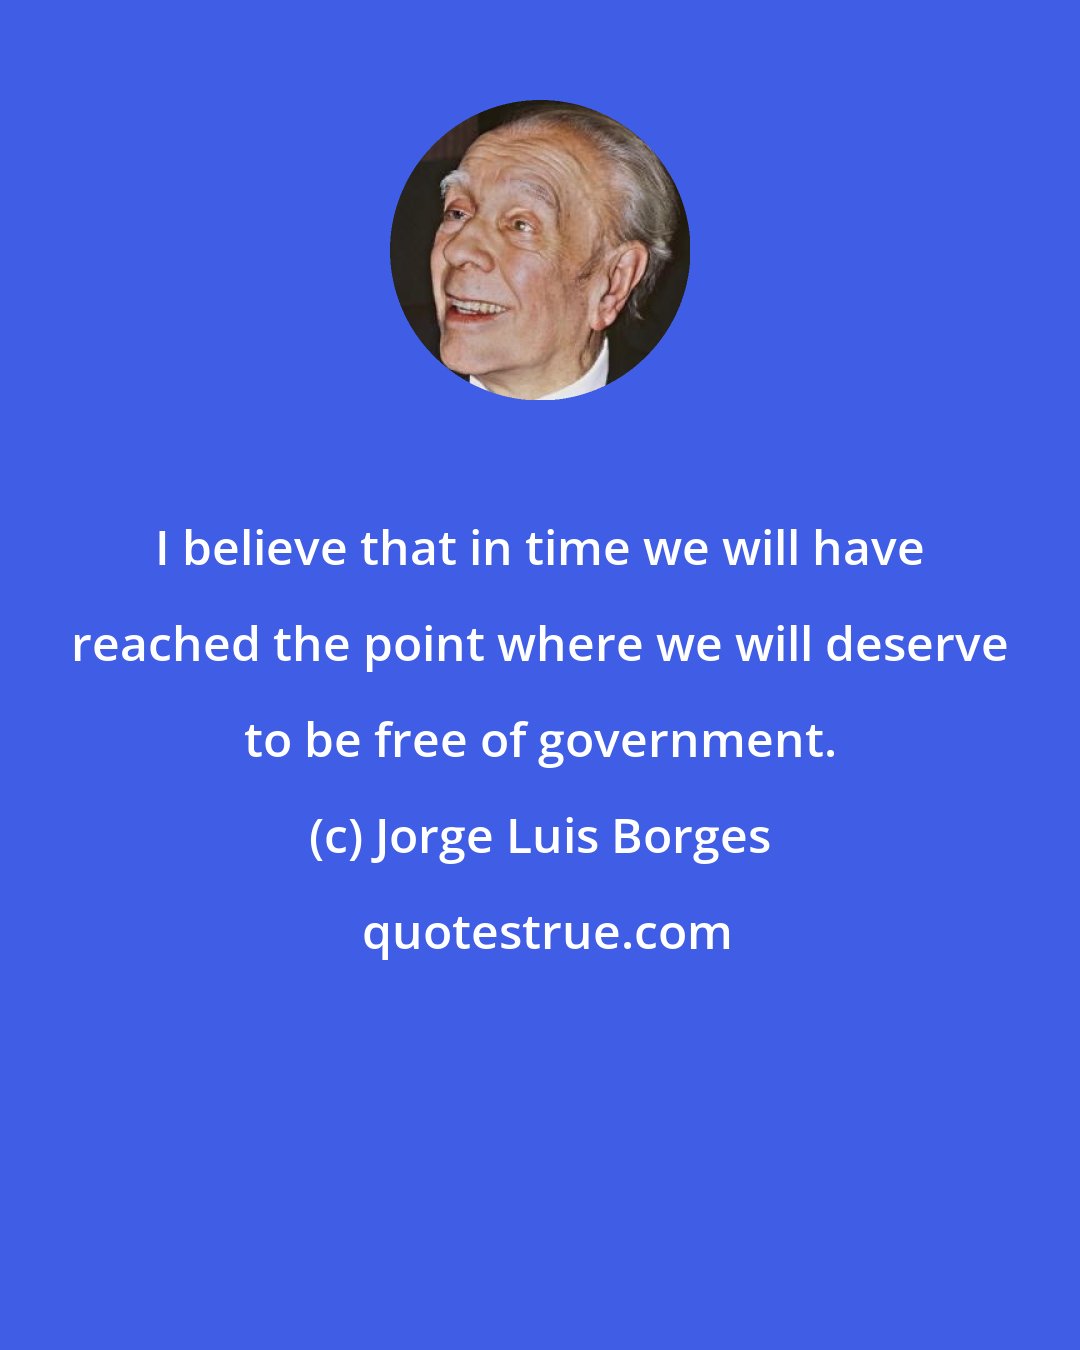 Jorge Luis Borges: I believe that in time we will have reached the point where we will deserve to be free of government.